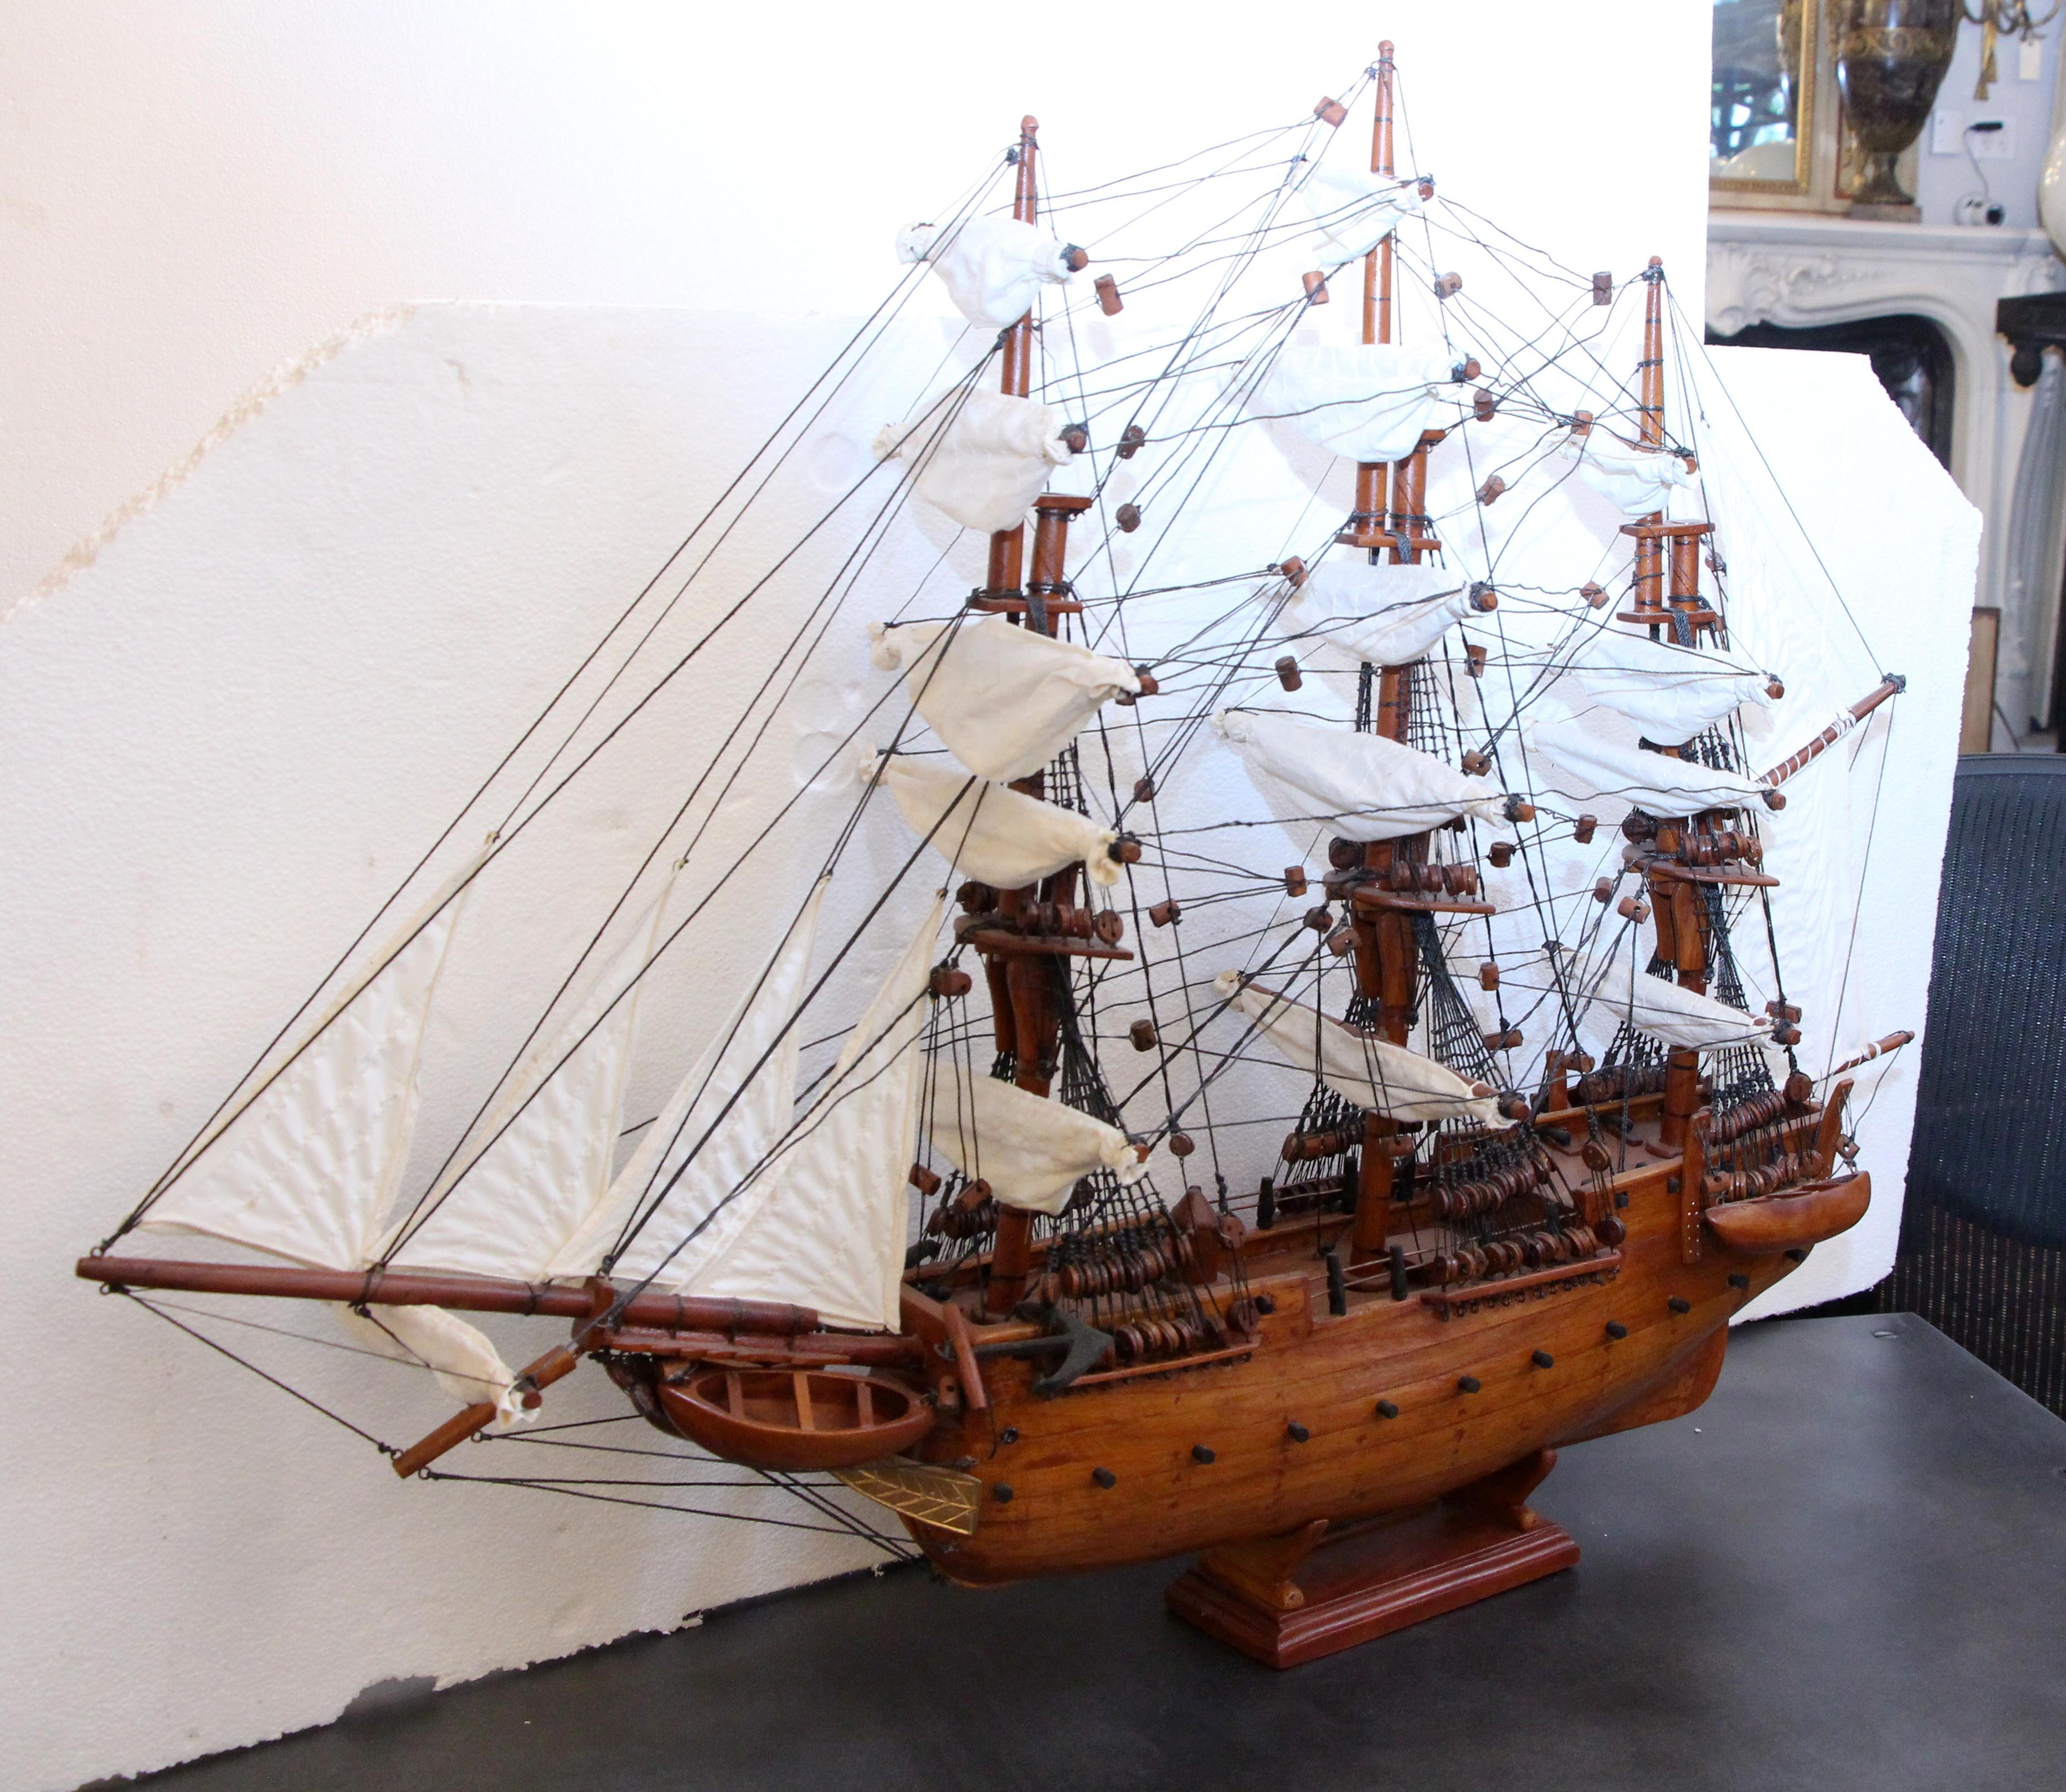 Model ship made by hand of wood and canvas, stamped Constitution. This was intricately done by local craftsmen in Haiti. This can be seen at our 2420 Broadway location on the upper west side in Manhattan.